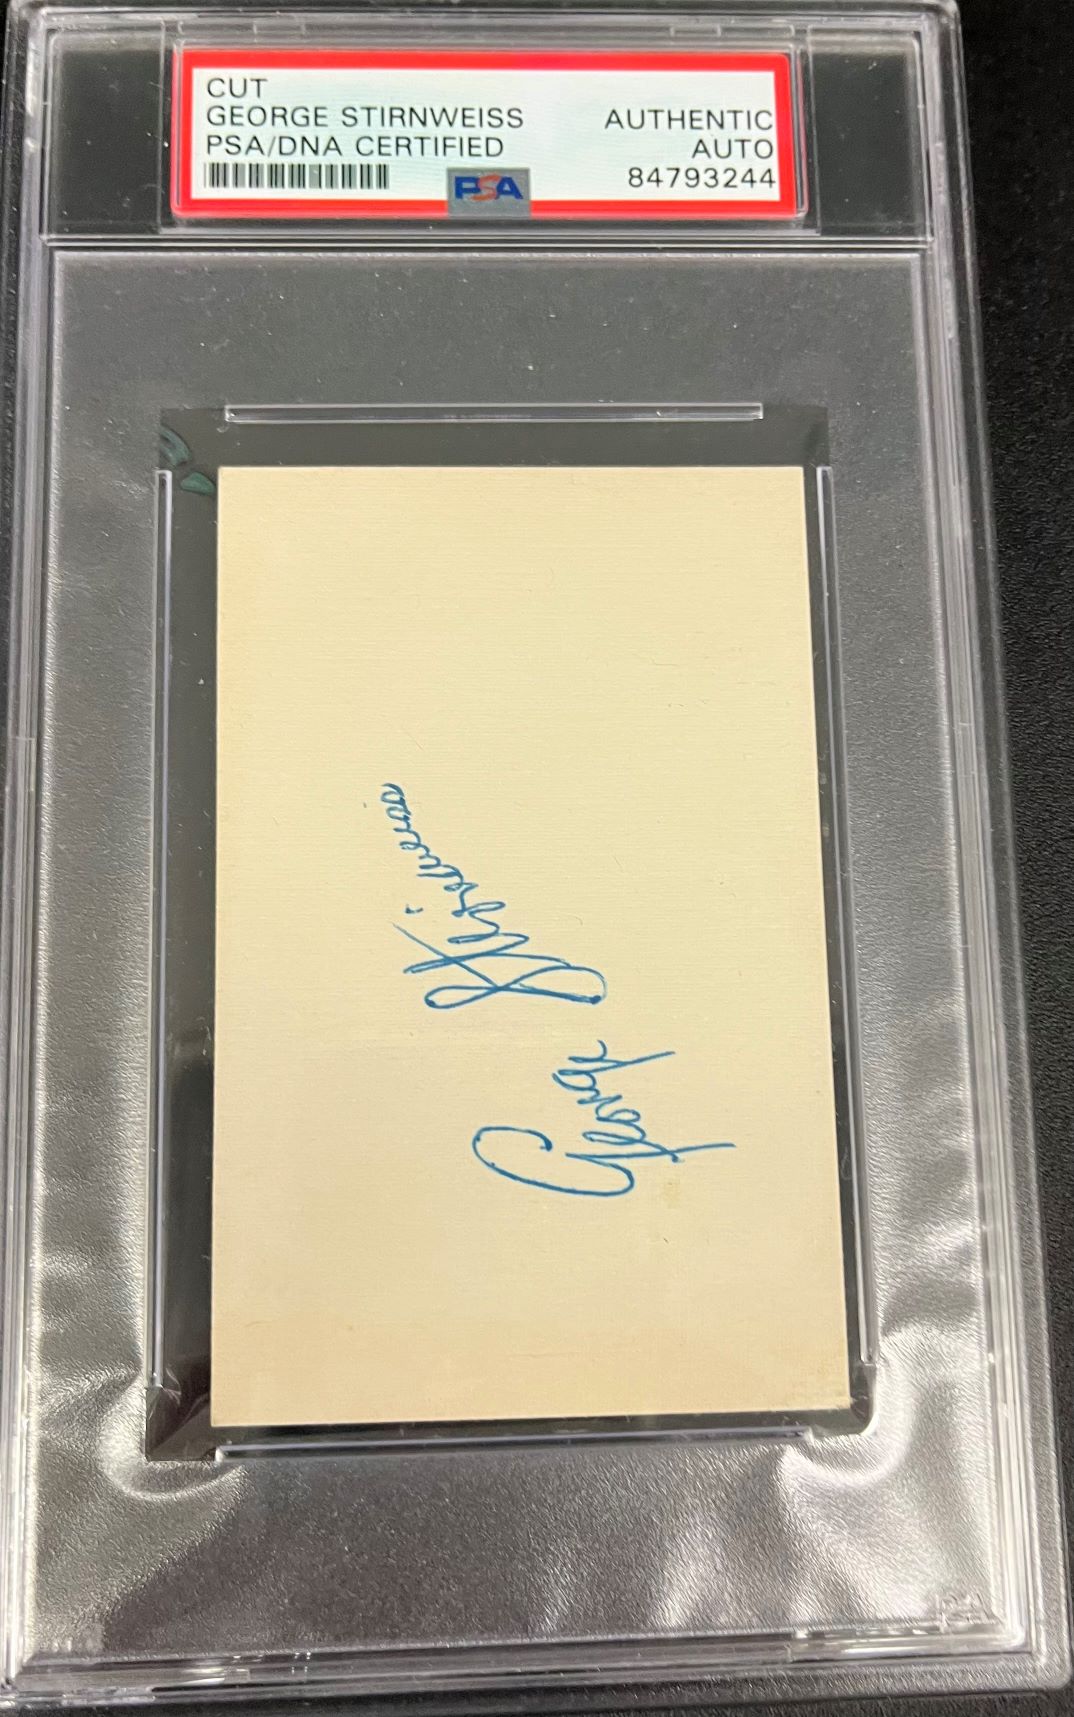 George Stirnweiss Signed Cut New York Yankees PSA Auto